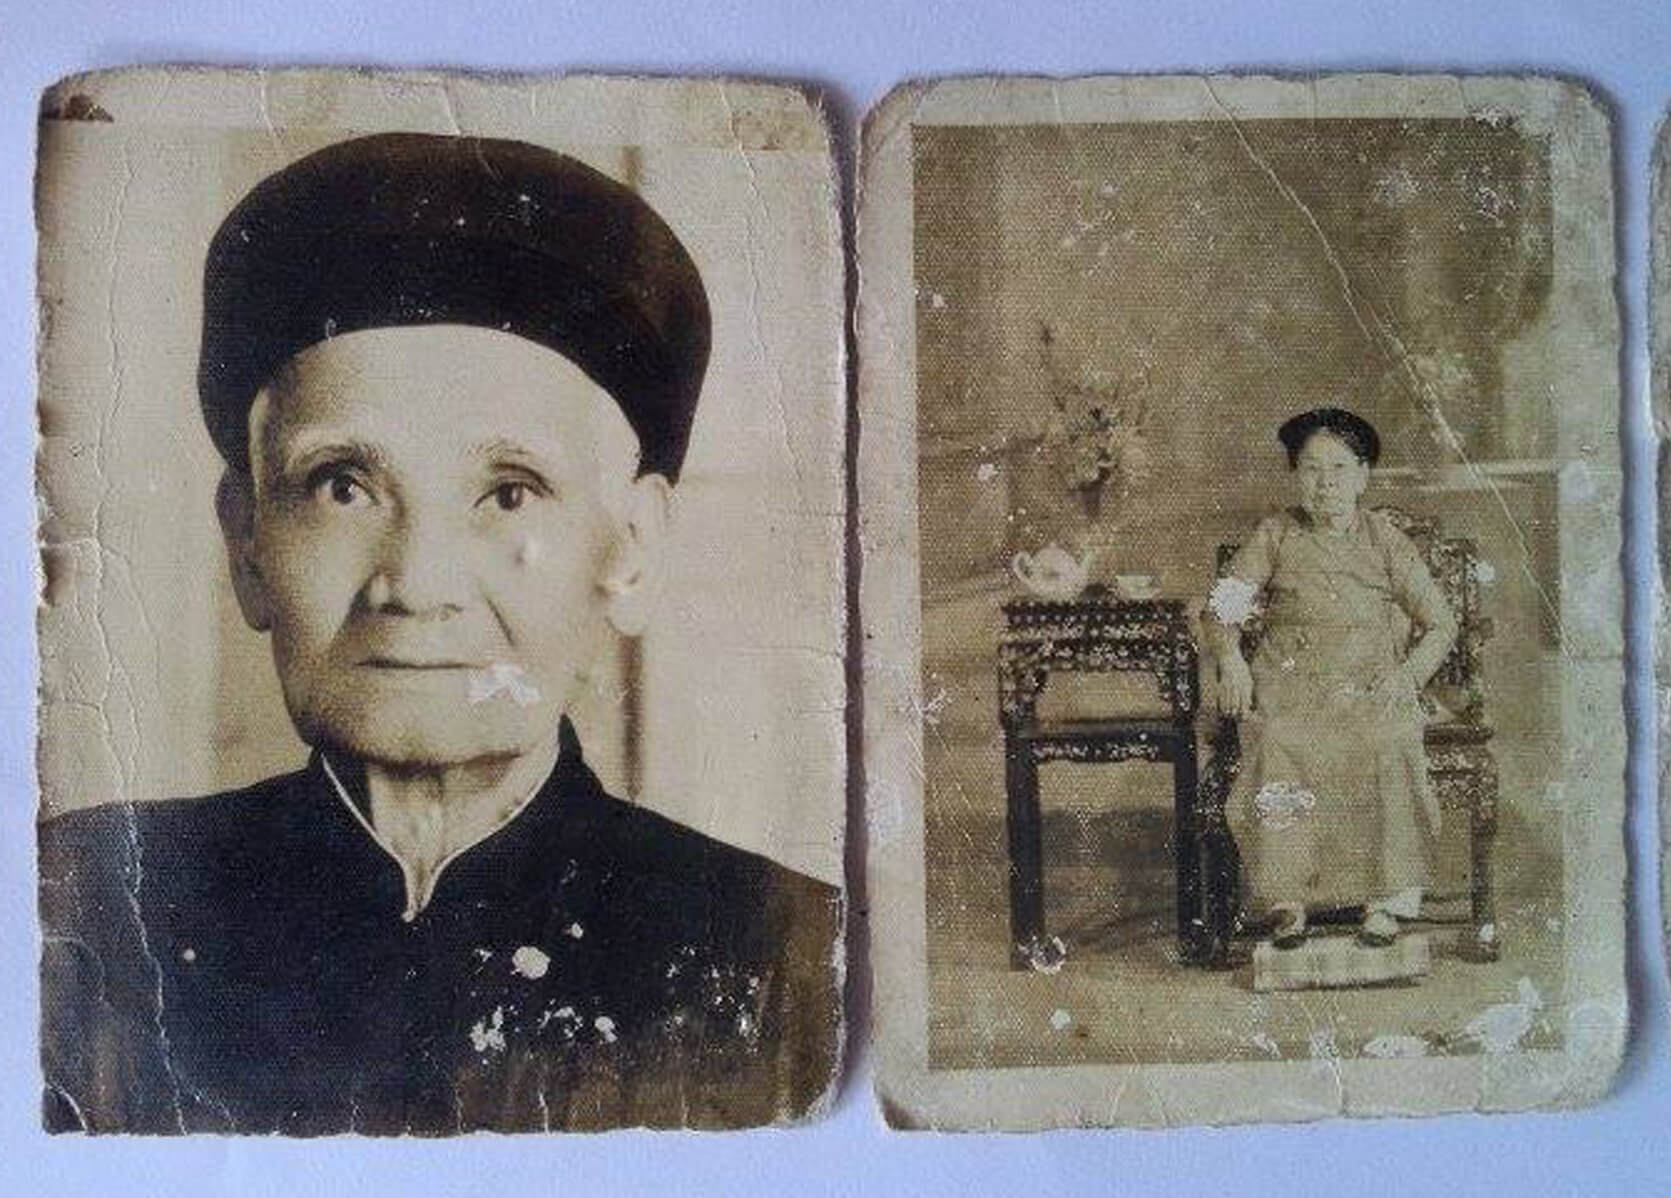 Faded portraits of a Vietnamese man and woman.